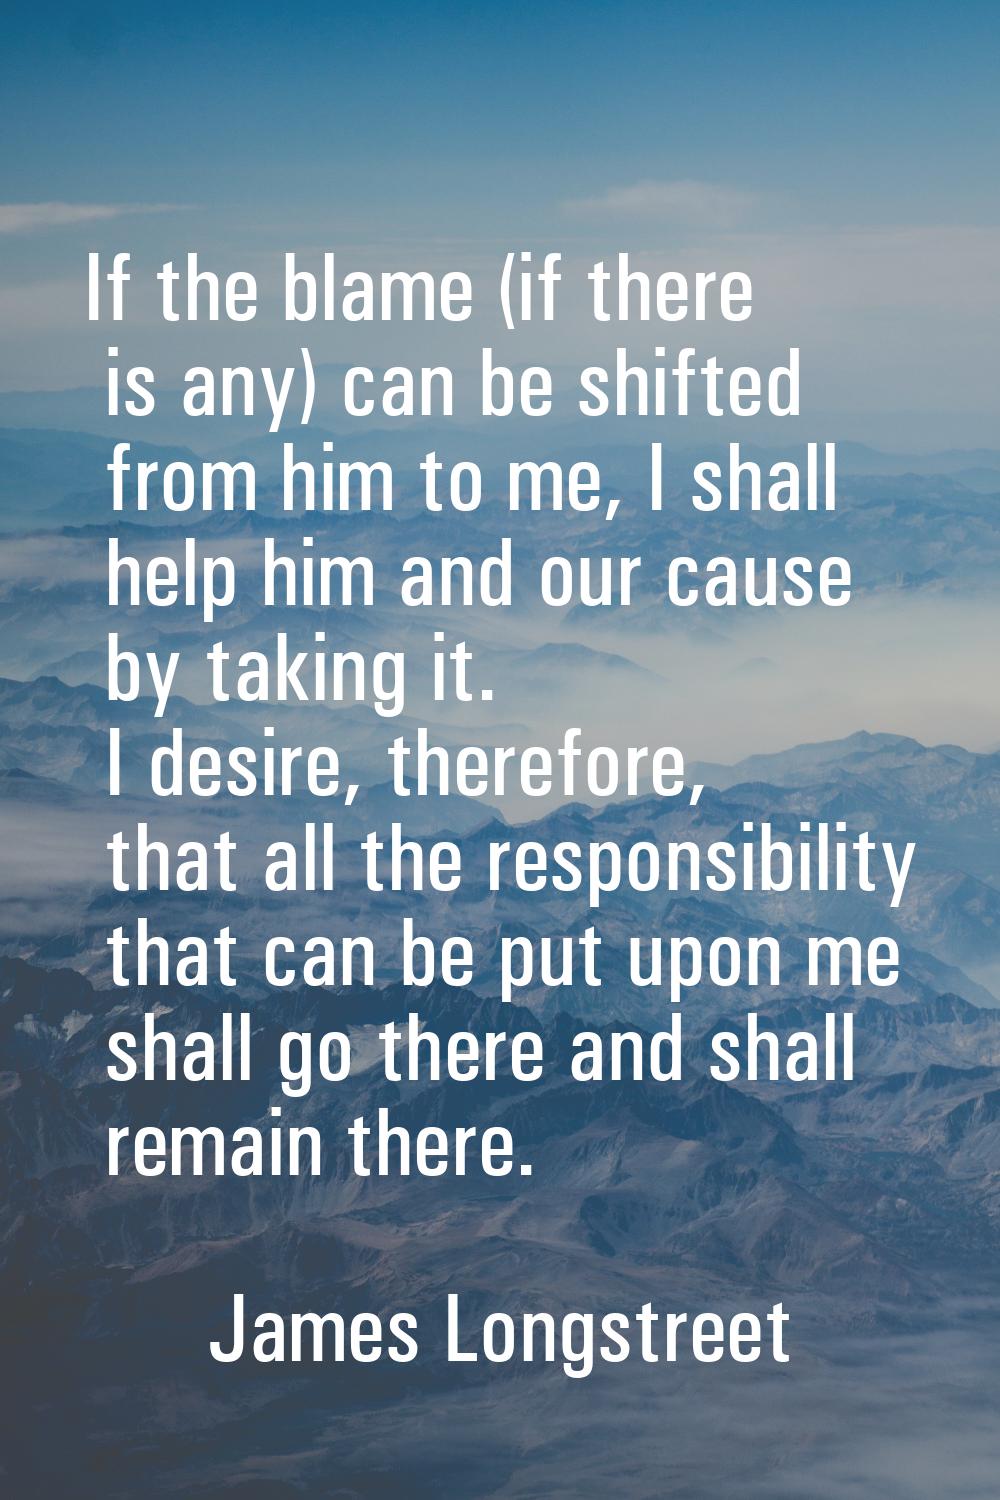 If the blame (if there is any) can be shifted from him to me, I shall help him and our cause by tak